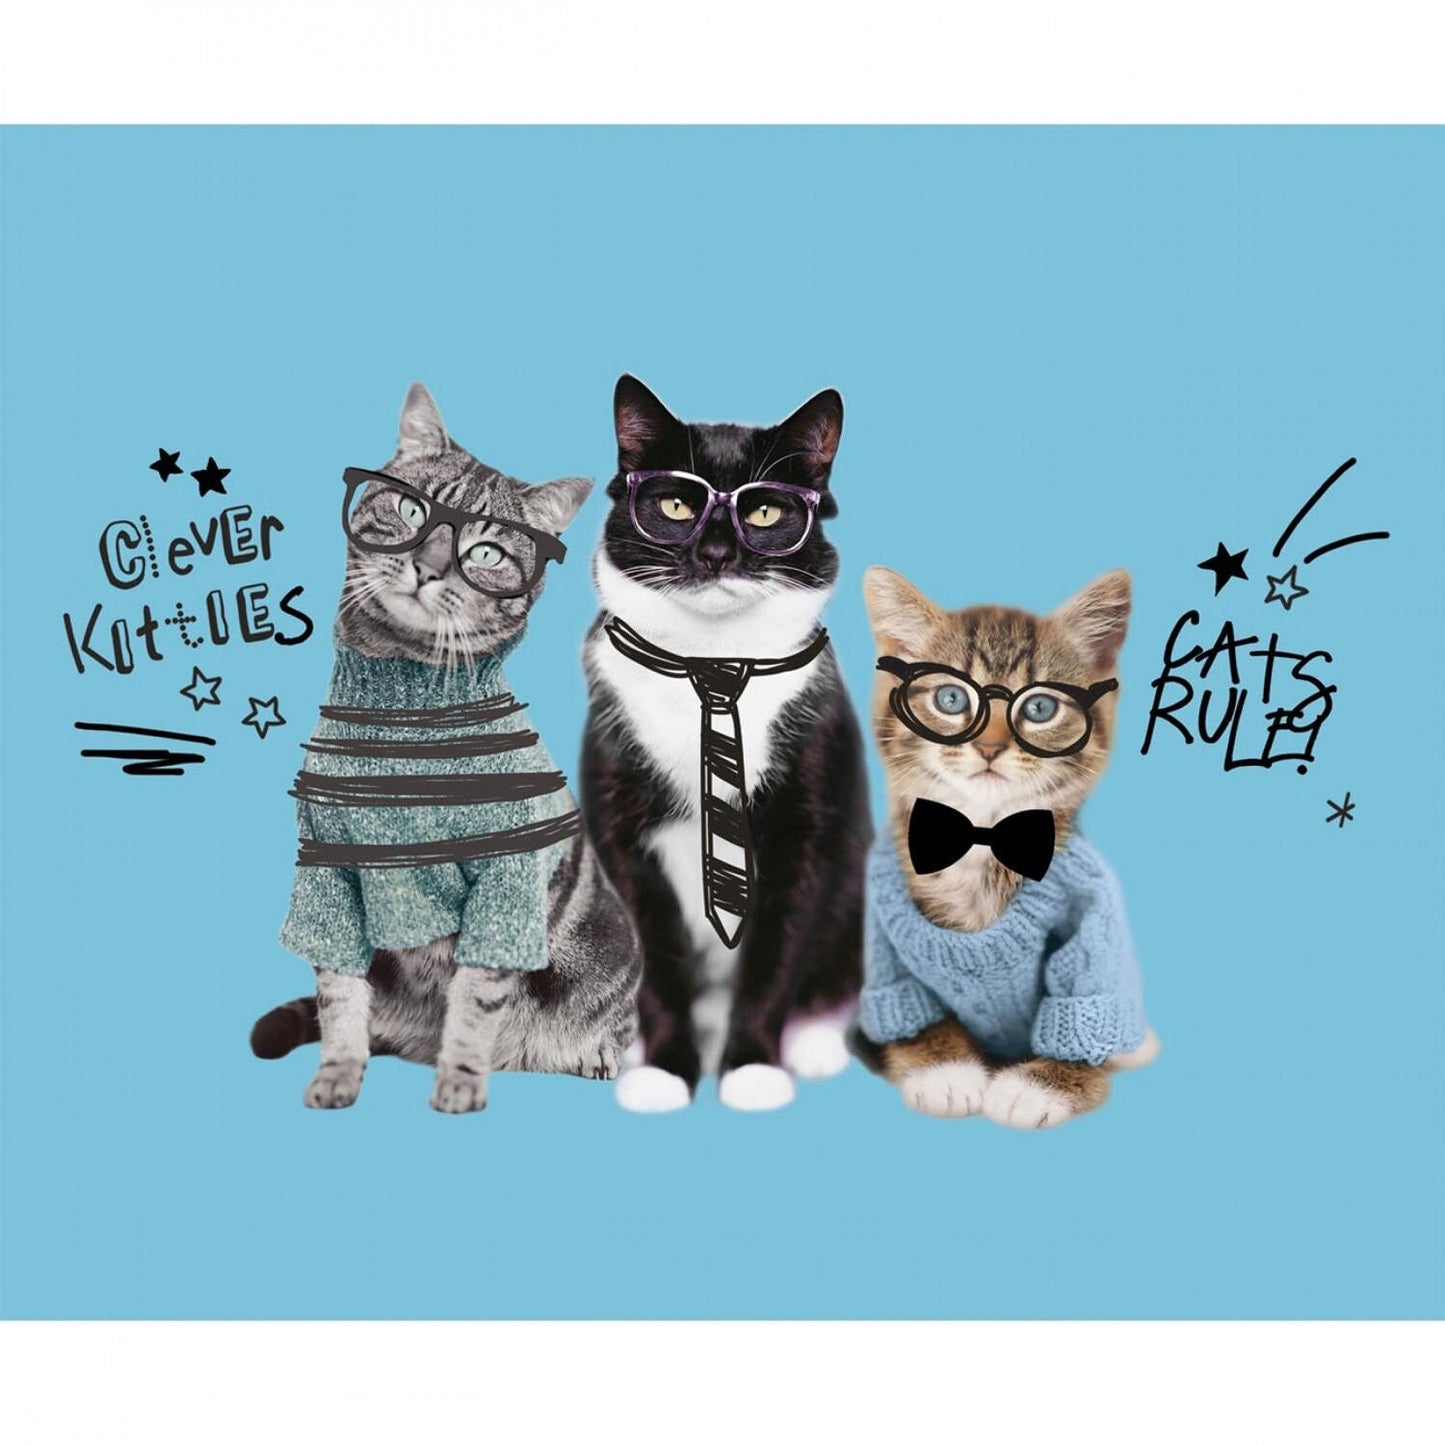 Cats Rule Blue Cats Rule Digitally Printed 36" Panel 34180108PJ-1 Cotton Woven Panel